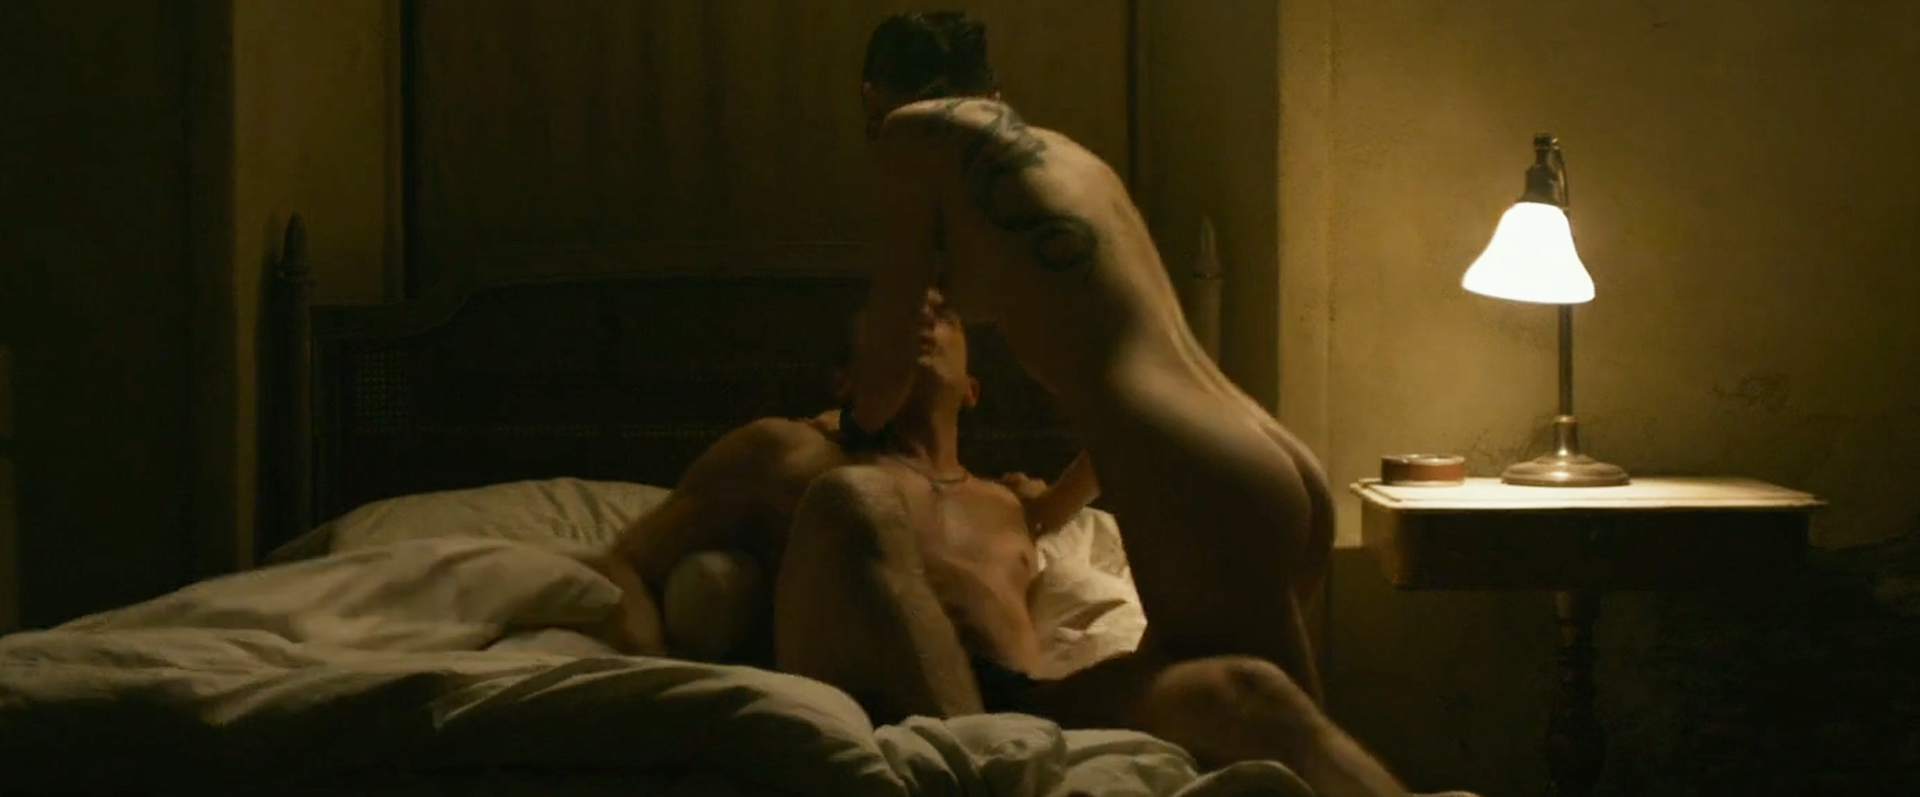 Girl.with the dragon tattoo sex scene